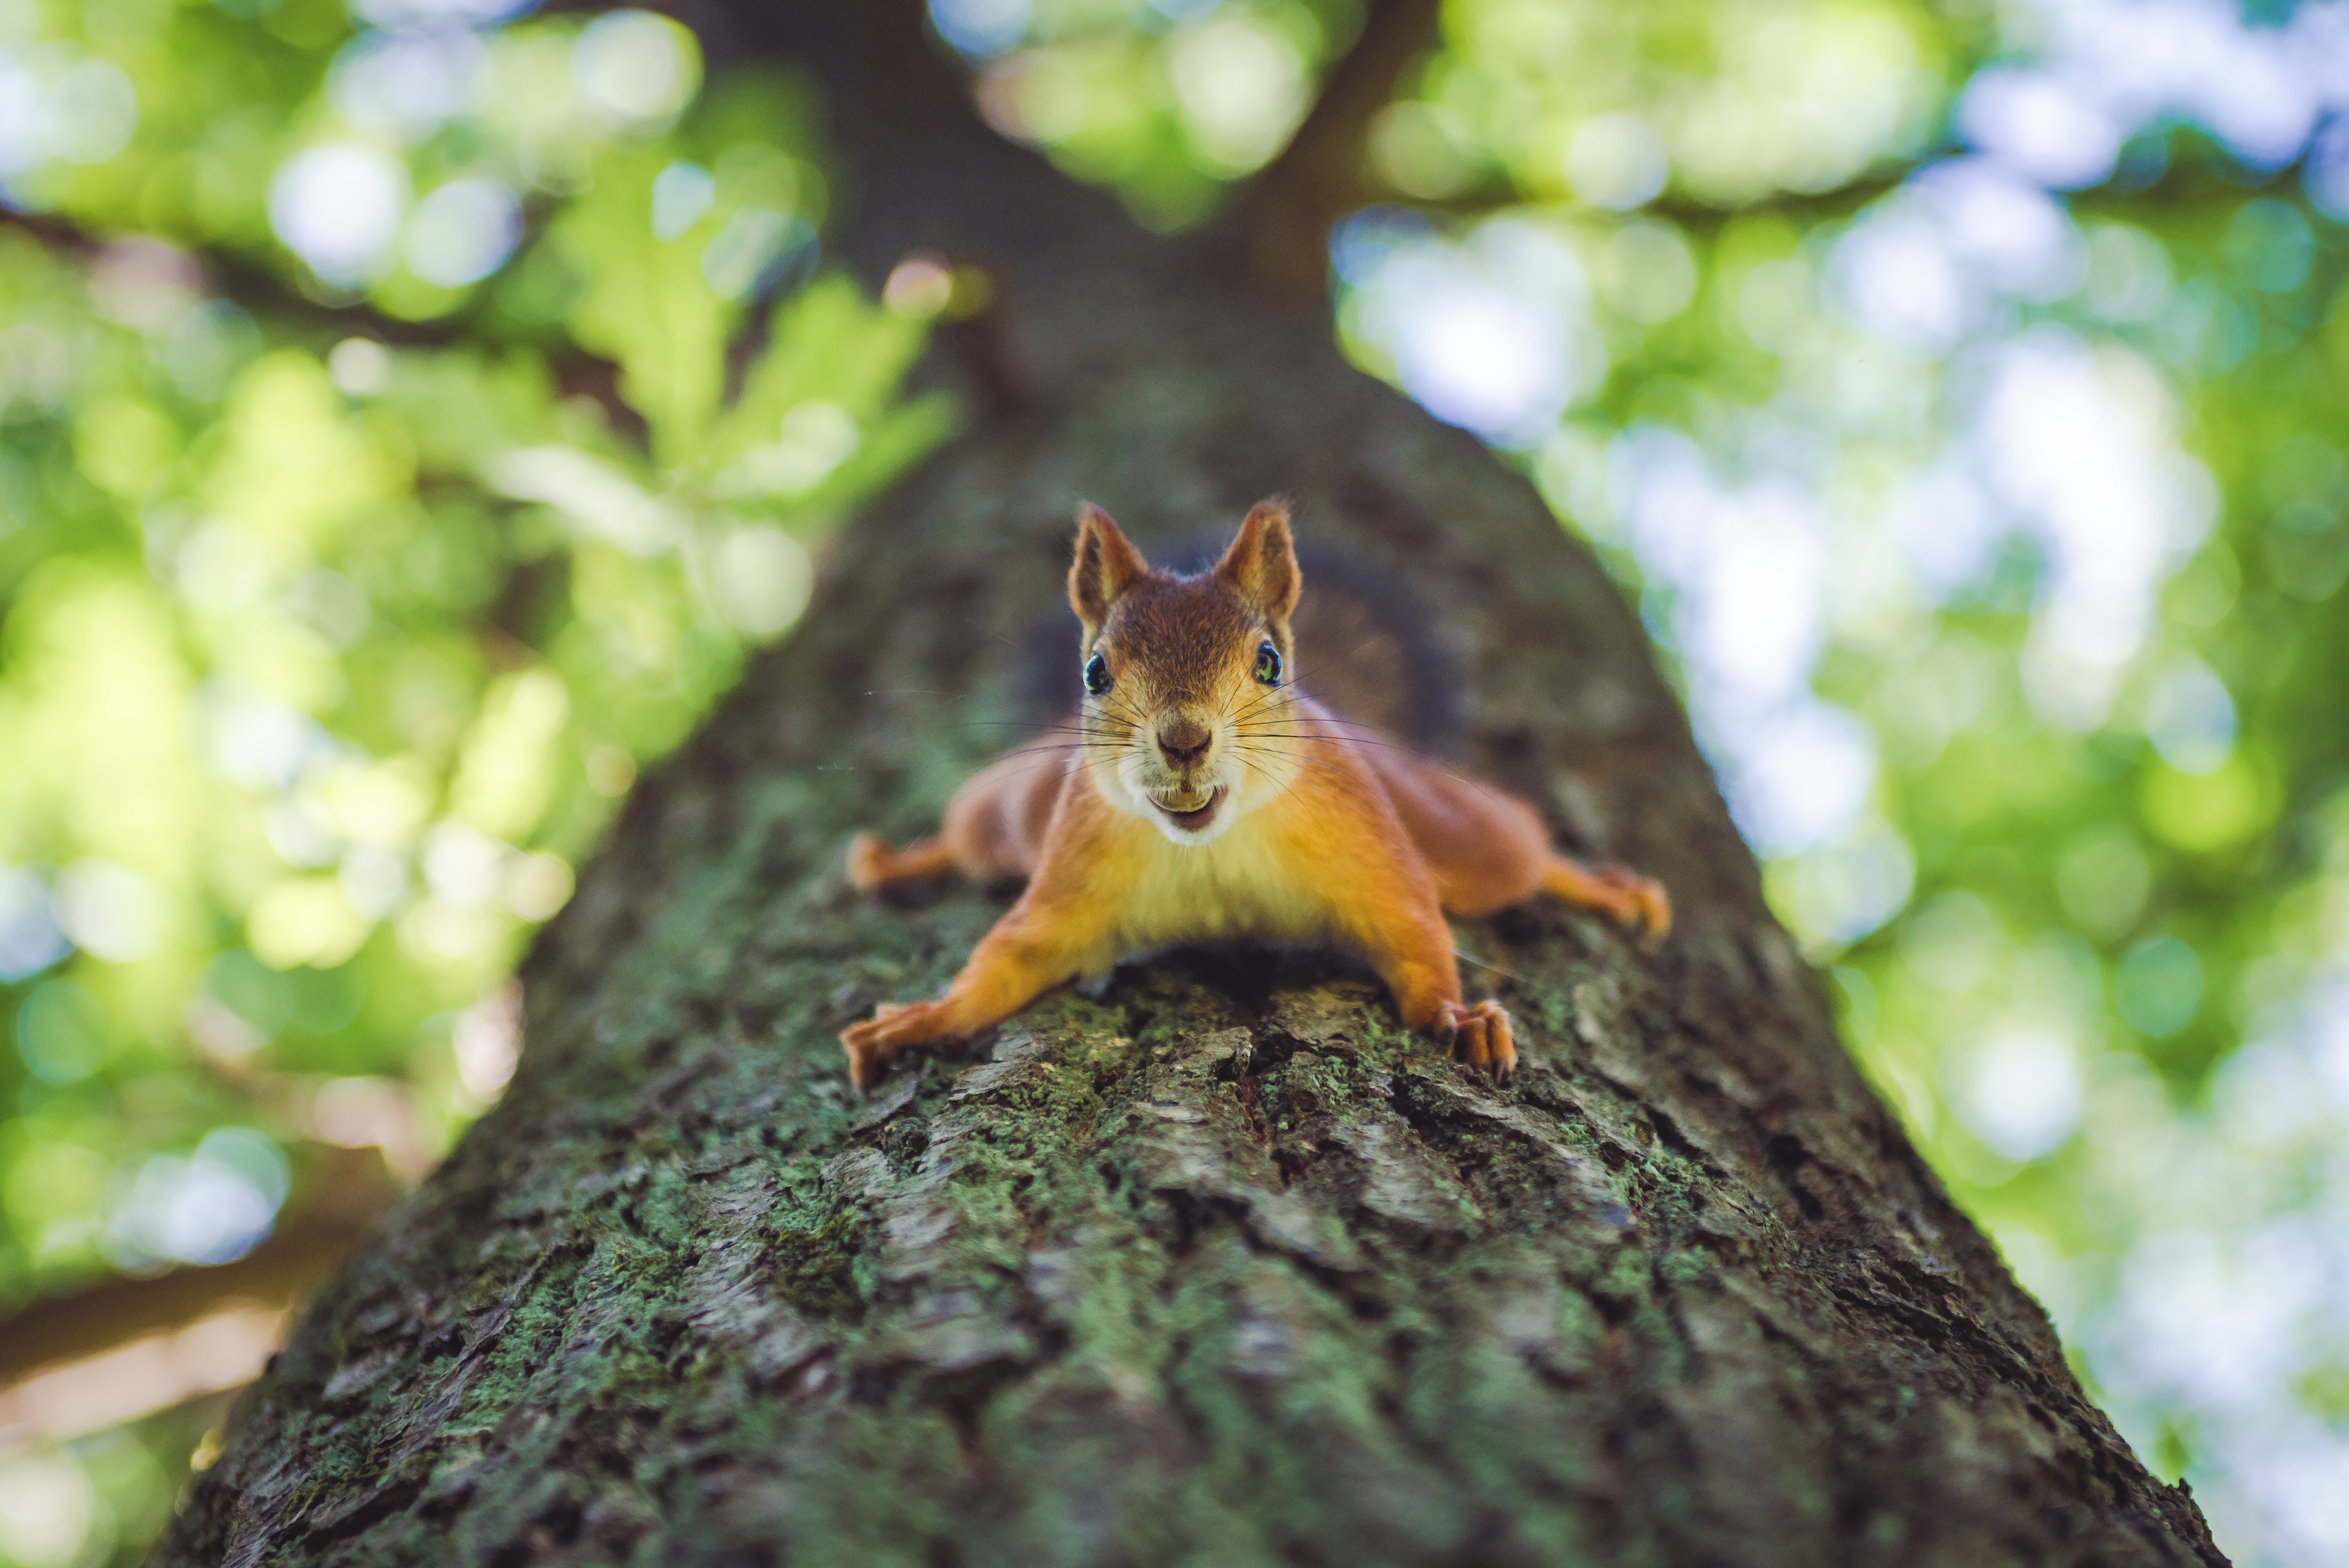 animal, background, beautiful, branch, brown, color, cute, day, eating, feed, fluffy, forest, front, fur, mammal, nature, nut, orange, outdoor, park, red, rodent, sitting, small, squirrel, summer, tail, tree, weekend, wild, wildlife, with, Никонов Данил